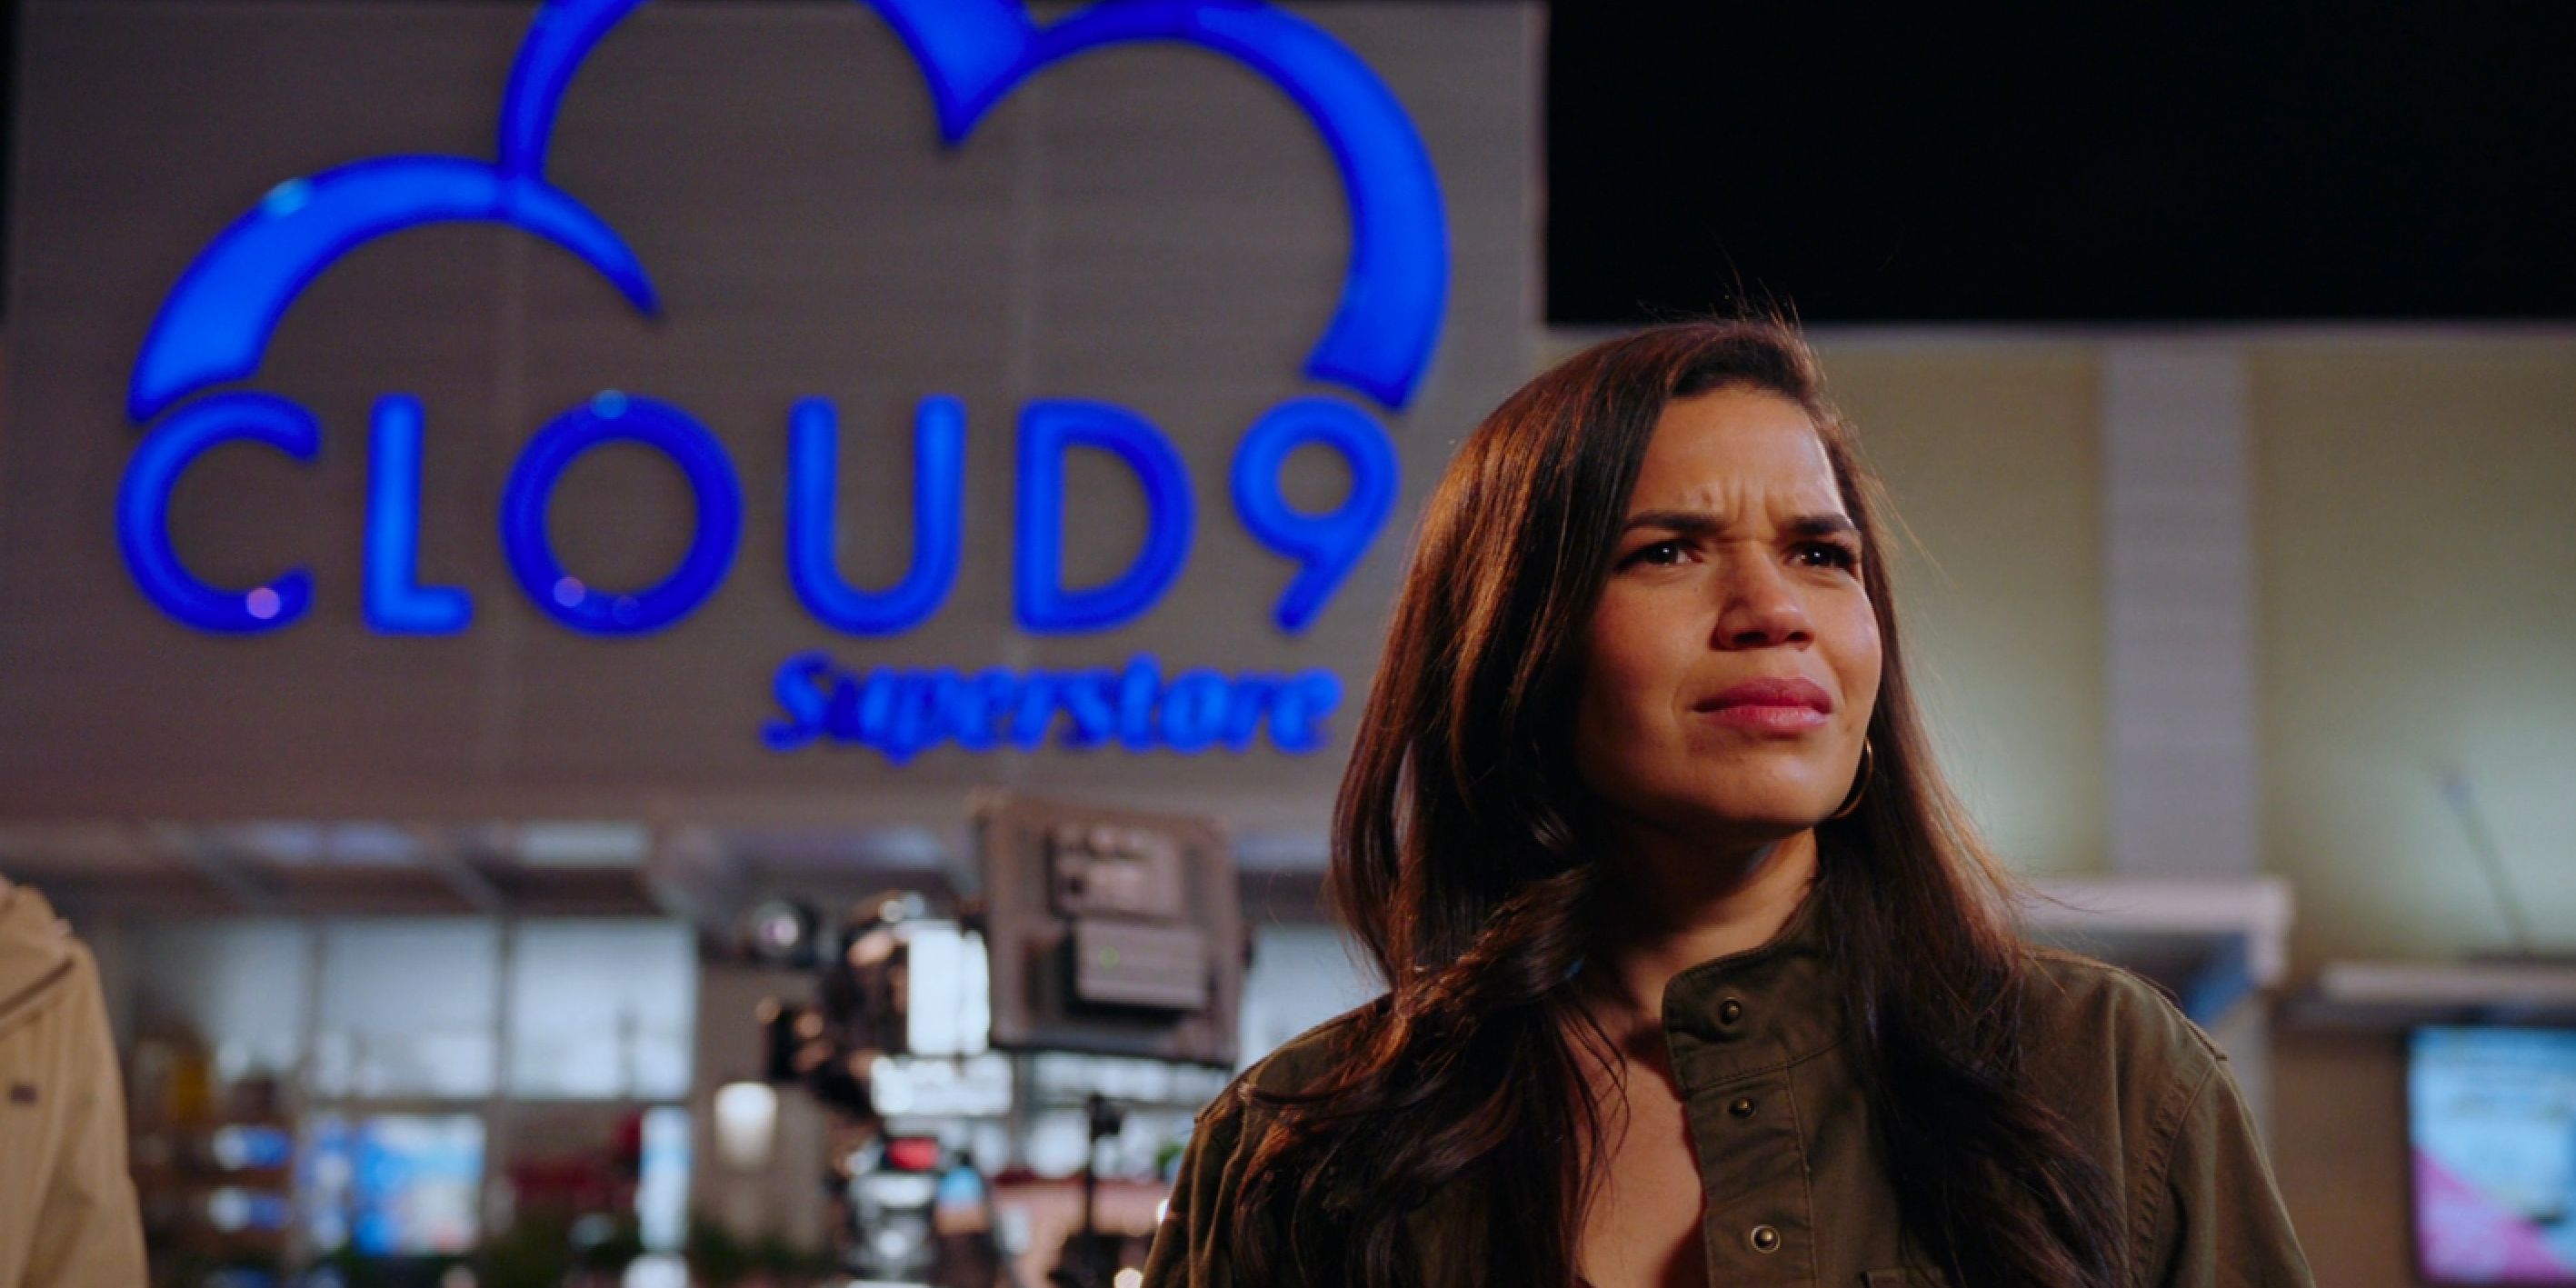 Amy quits her job when she finds out Zephra is closing Cloud 9.